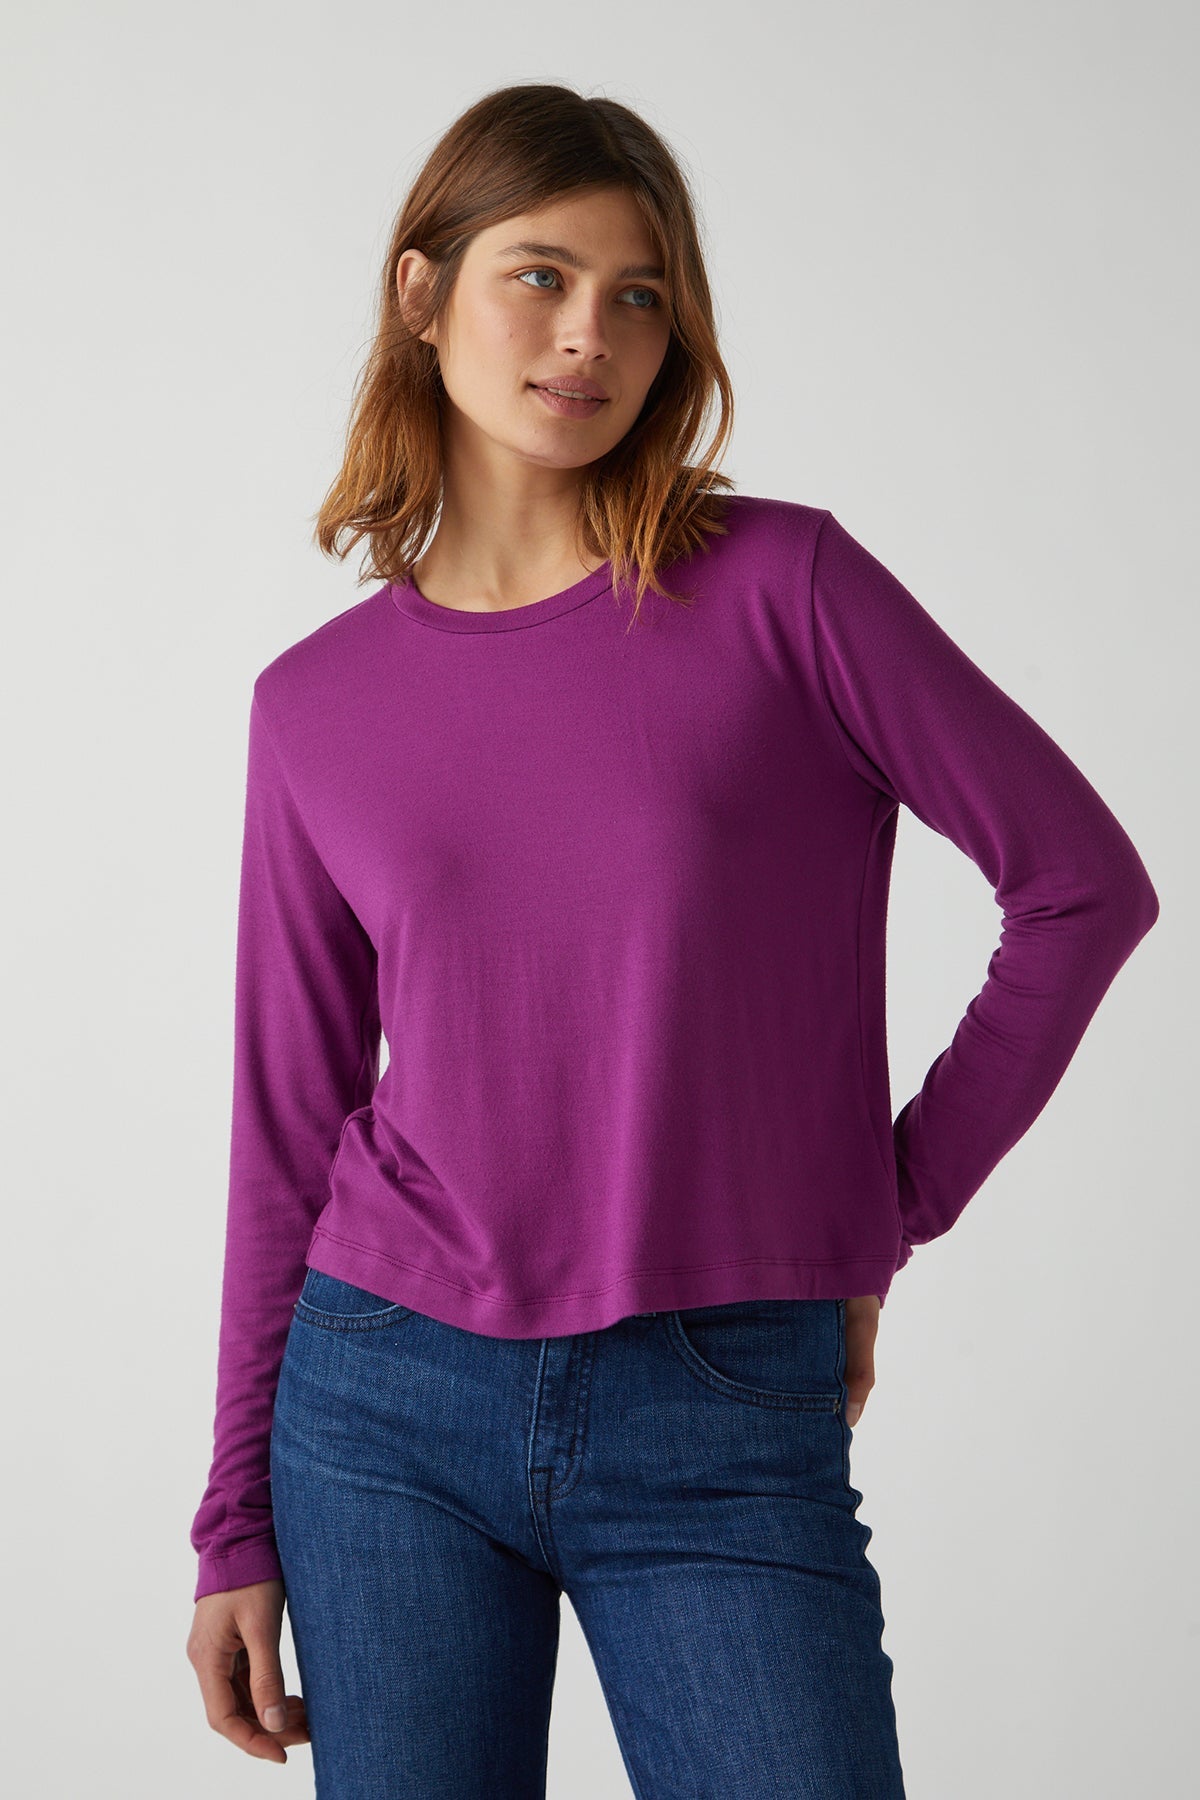 A woman wearing a Velvet by Jenny Graham purple rib knit long-sleeved Pacifica tee and stretch jeans.-26413773914305